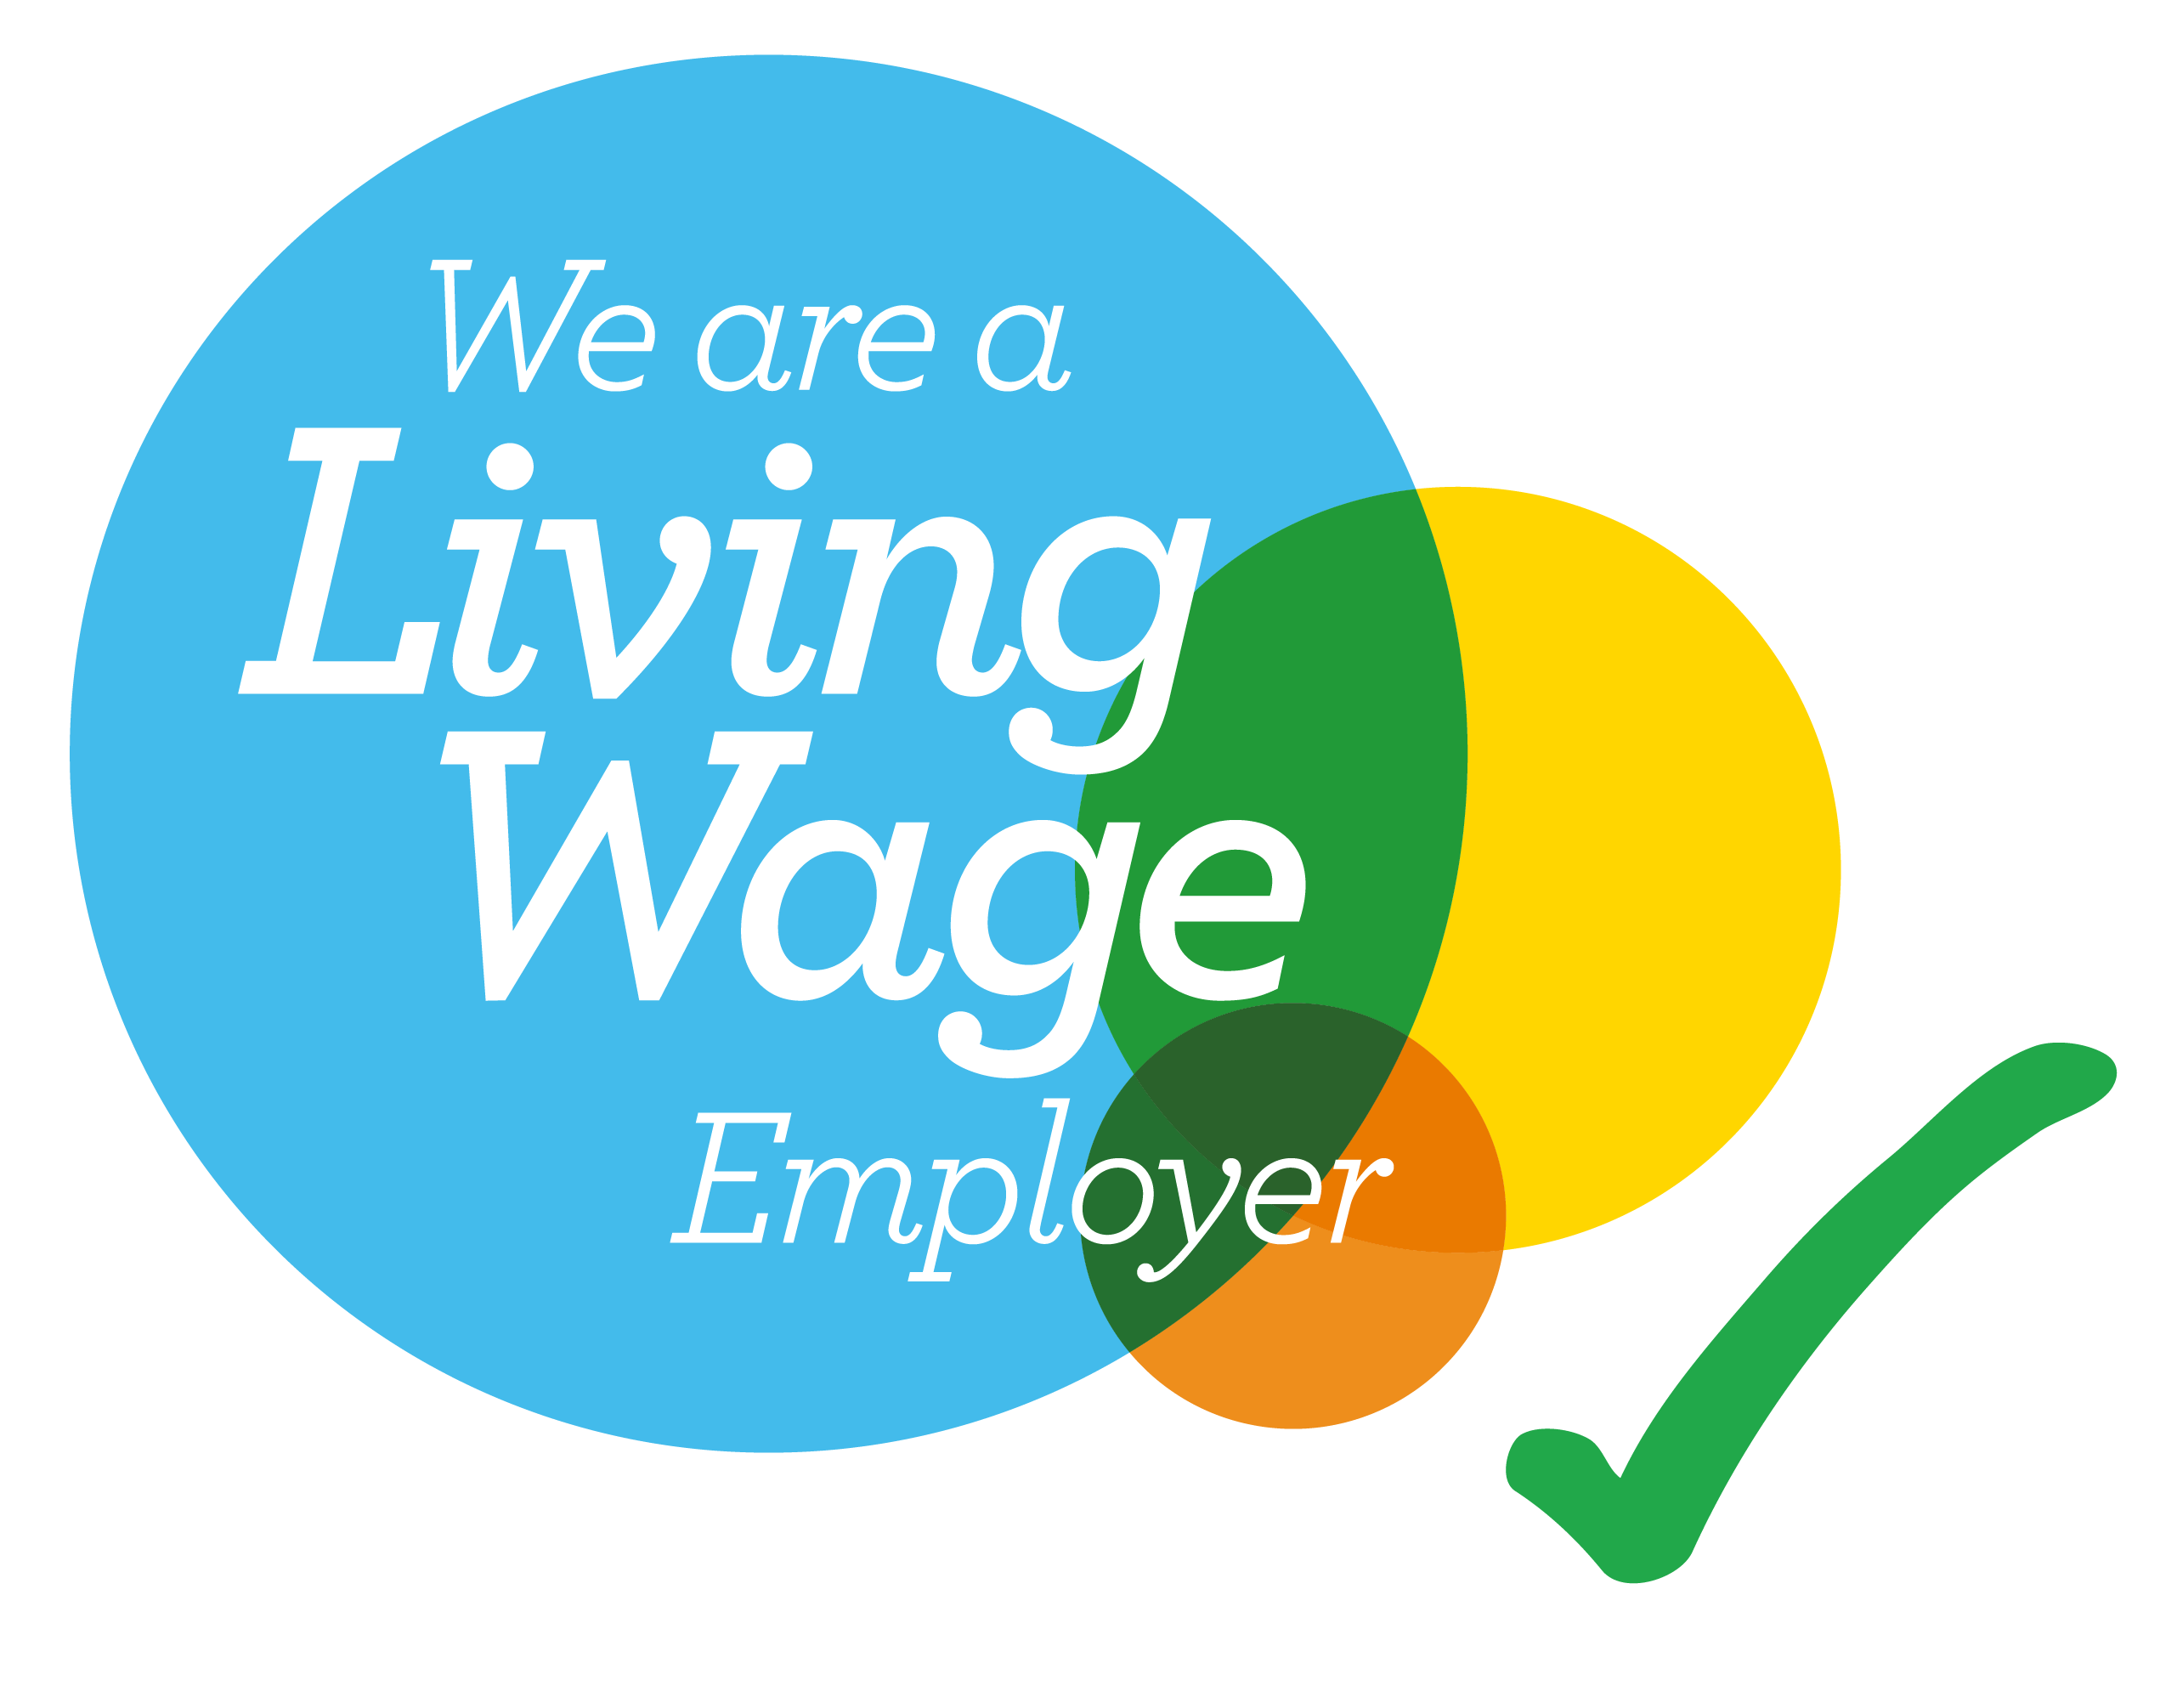 Rosemont is a Living Wage Employer